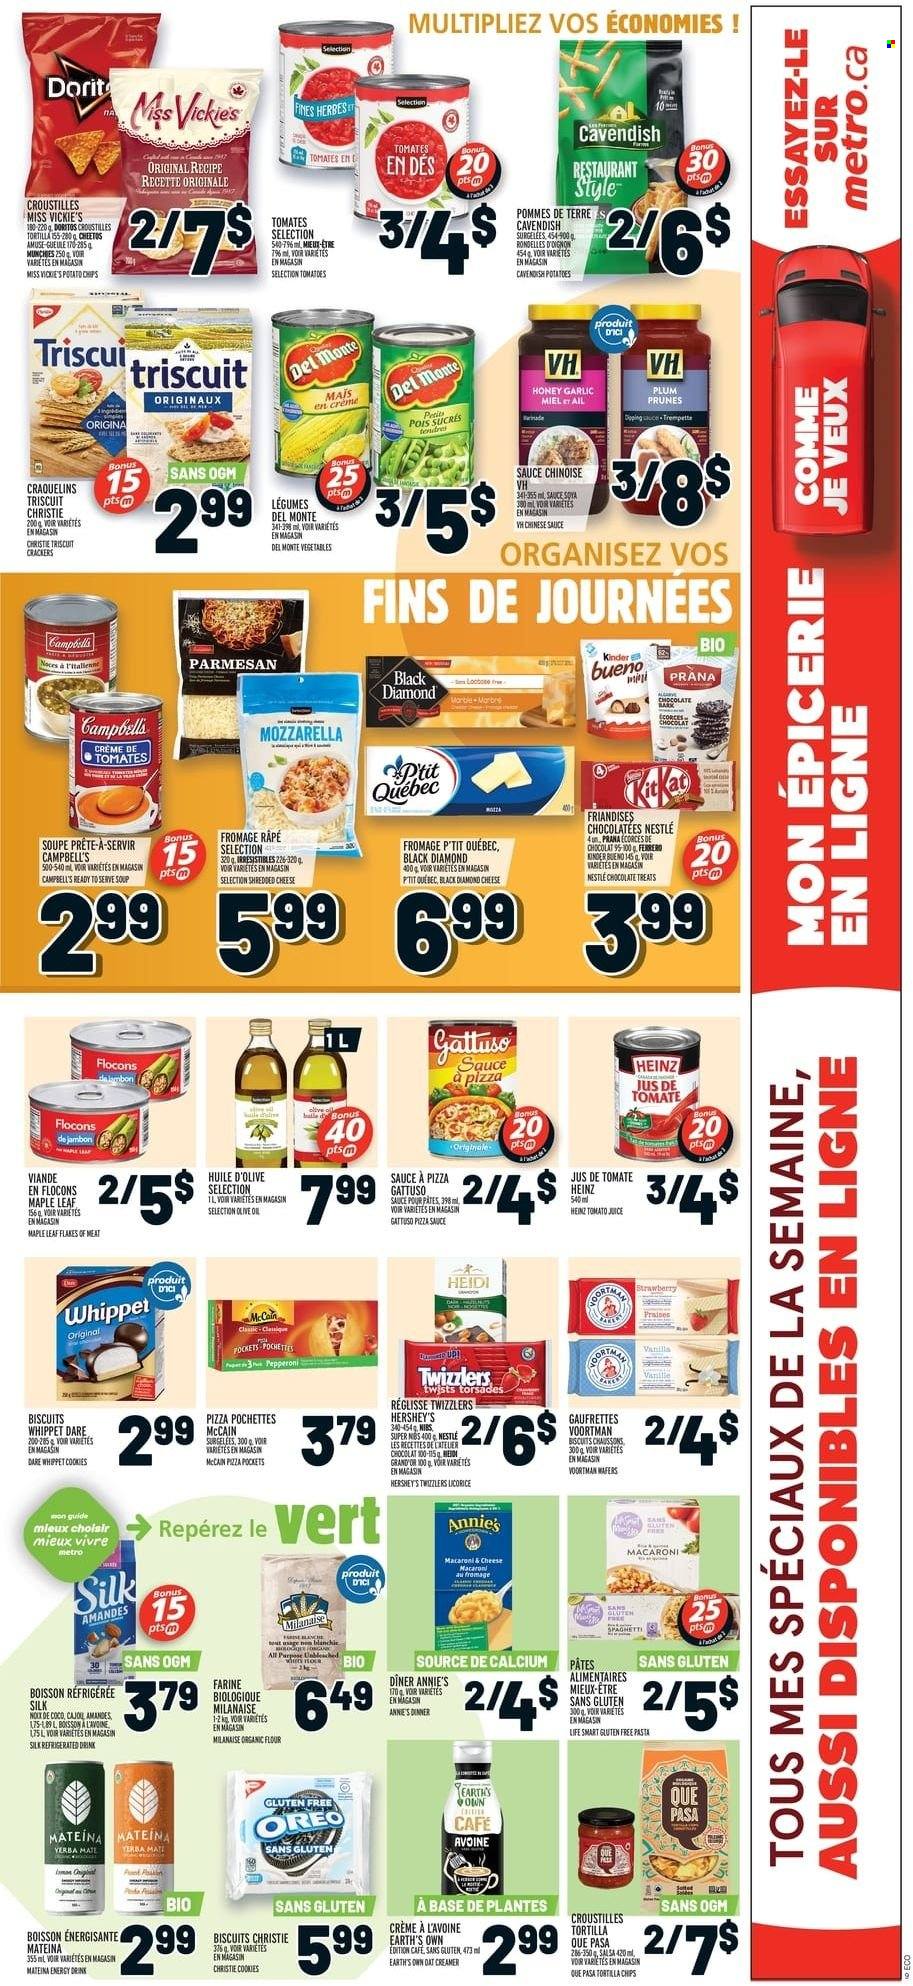 thumbnail - Metro Flyer - January 20, 2022 - January 26, 2022 - Sales products - tortillas, garlic, Campbell's, macaroni, soup, pasta, sauce, Annie's, pepperoni, shredded cheese, parmesan, Silk, creamer, Hershey's, McCain, cookies, chocolate, crackers, Kinder Bueno, biscuit, Cheetos, honey, prunes, dried fruit, energy drink, Oreo, Nestlé, Heinz, calcium, Miele. Page 11.